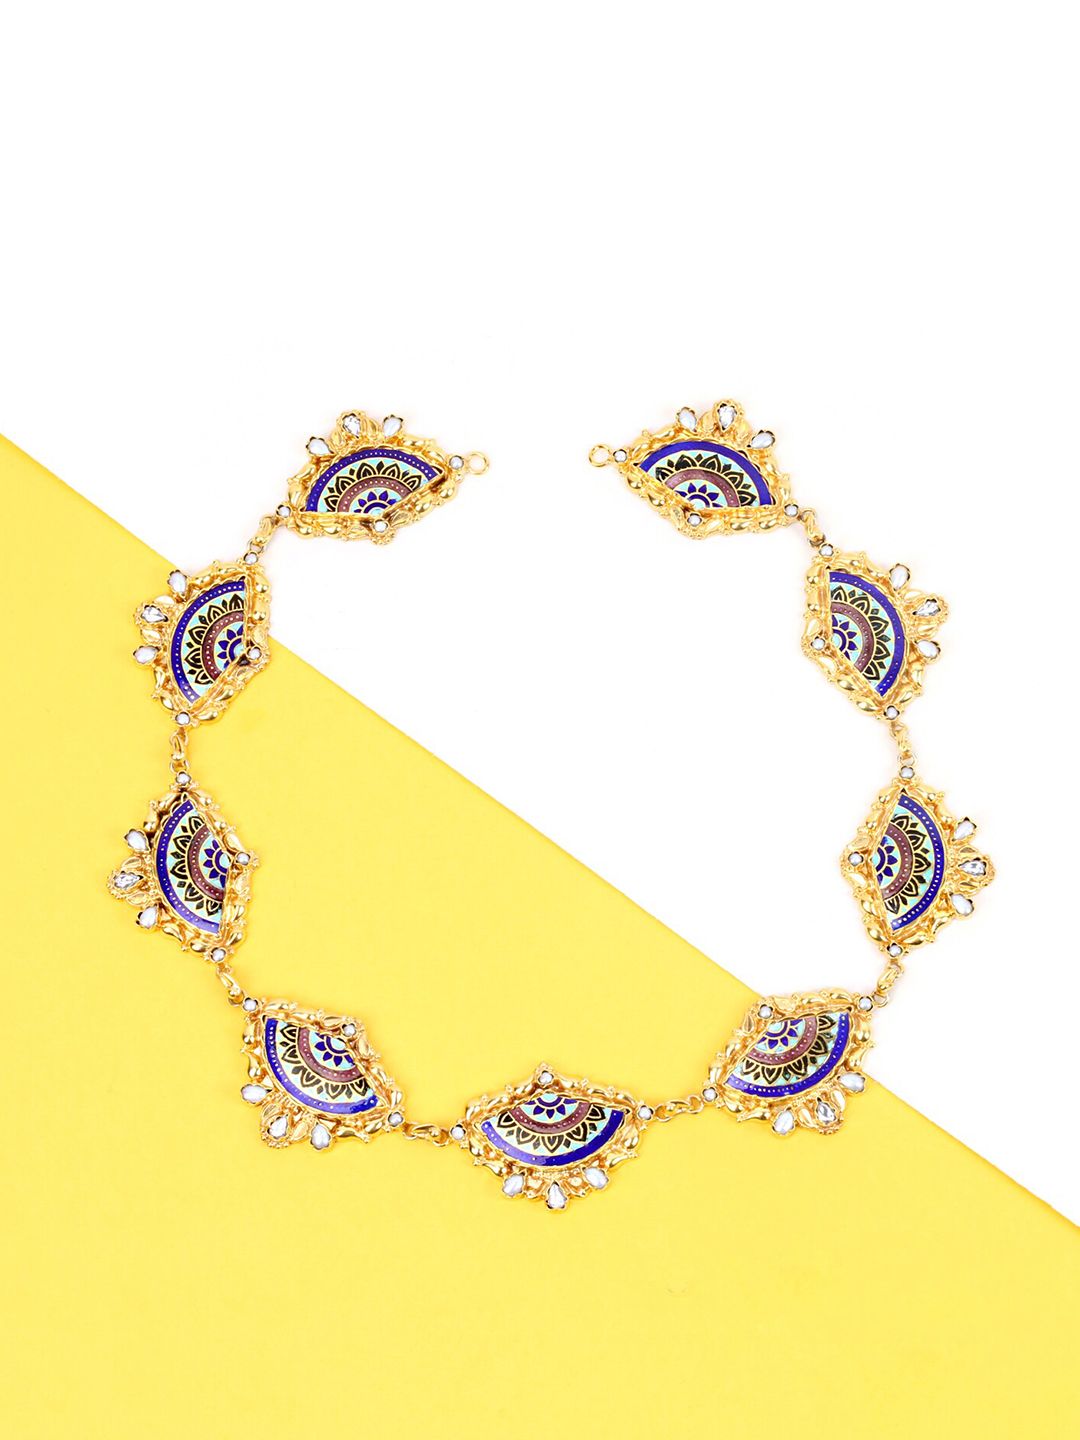 SANGEETA BOOCHRA Gold-Plated & Blue Silver Necklace Price in India